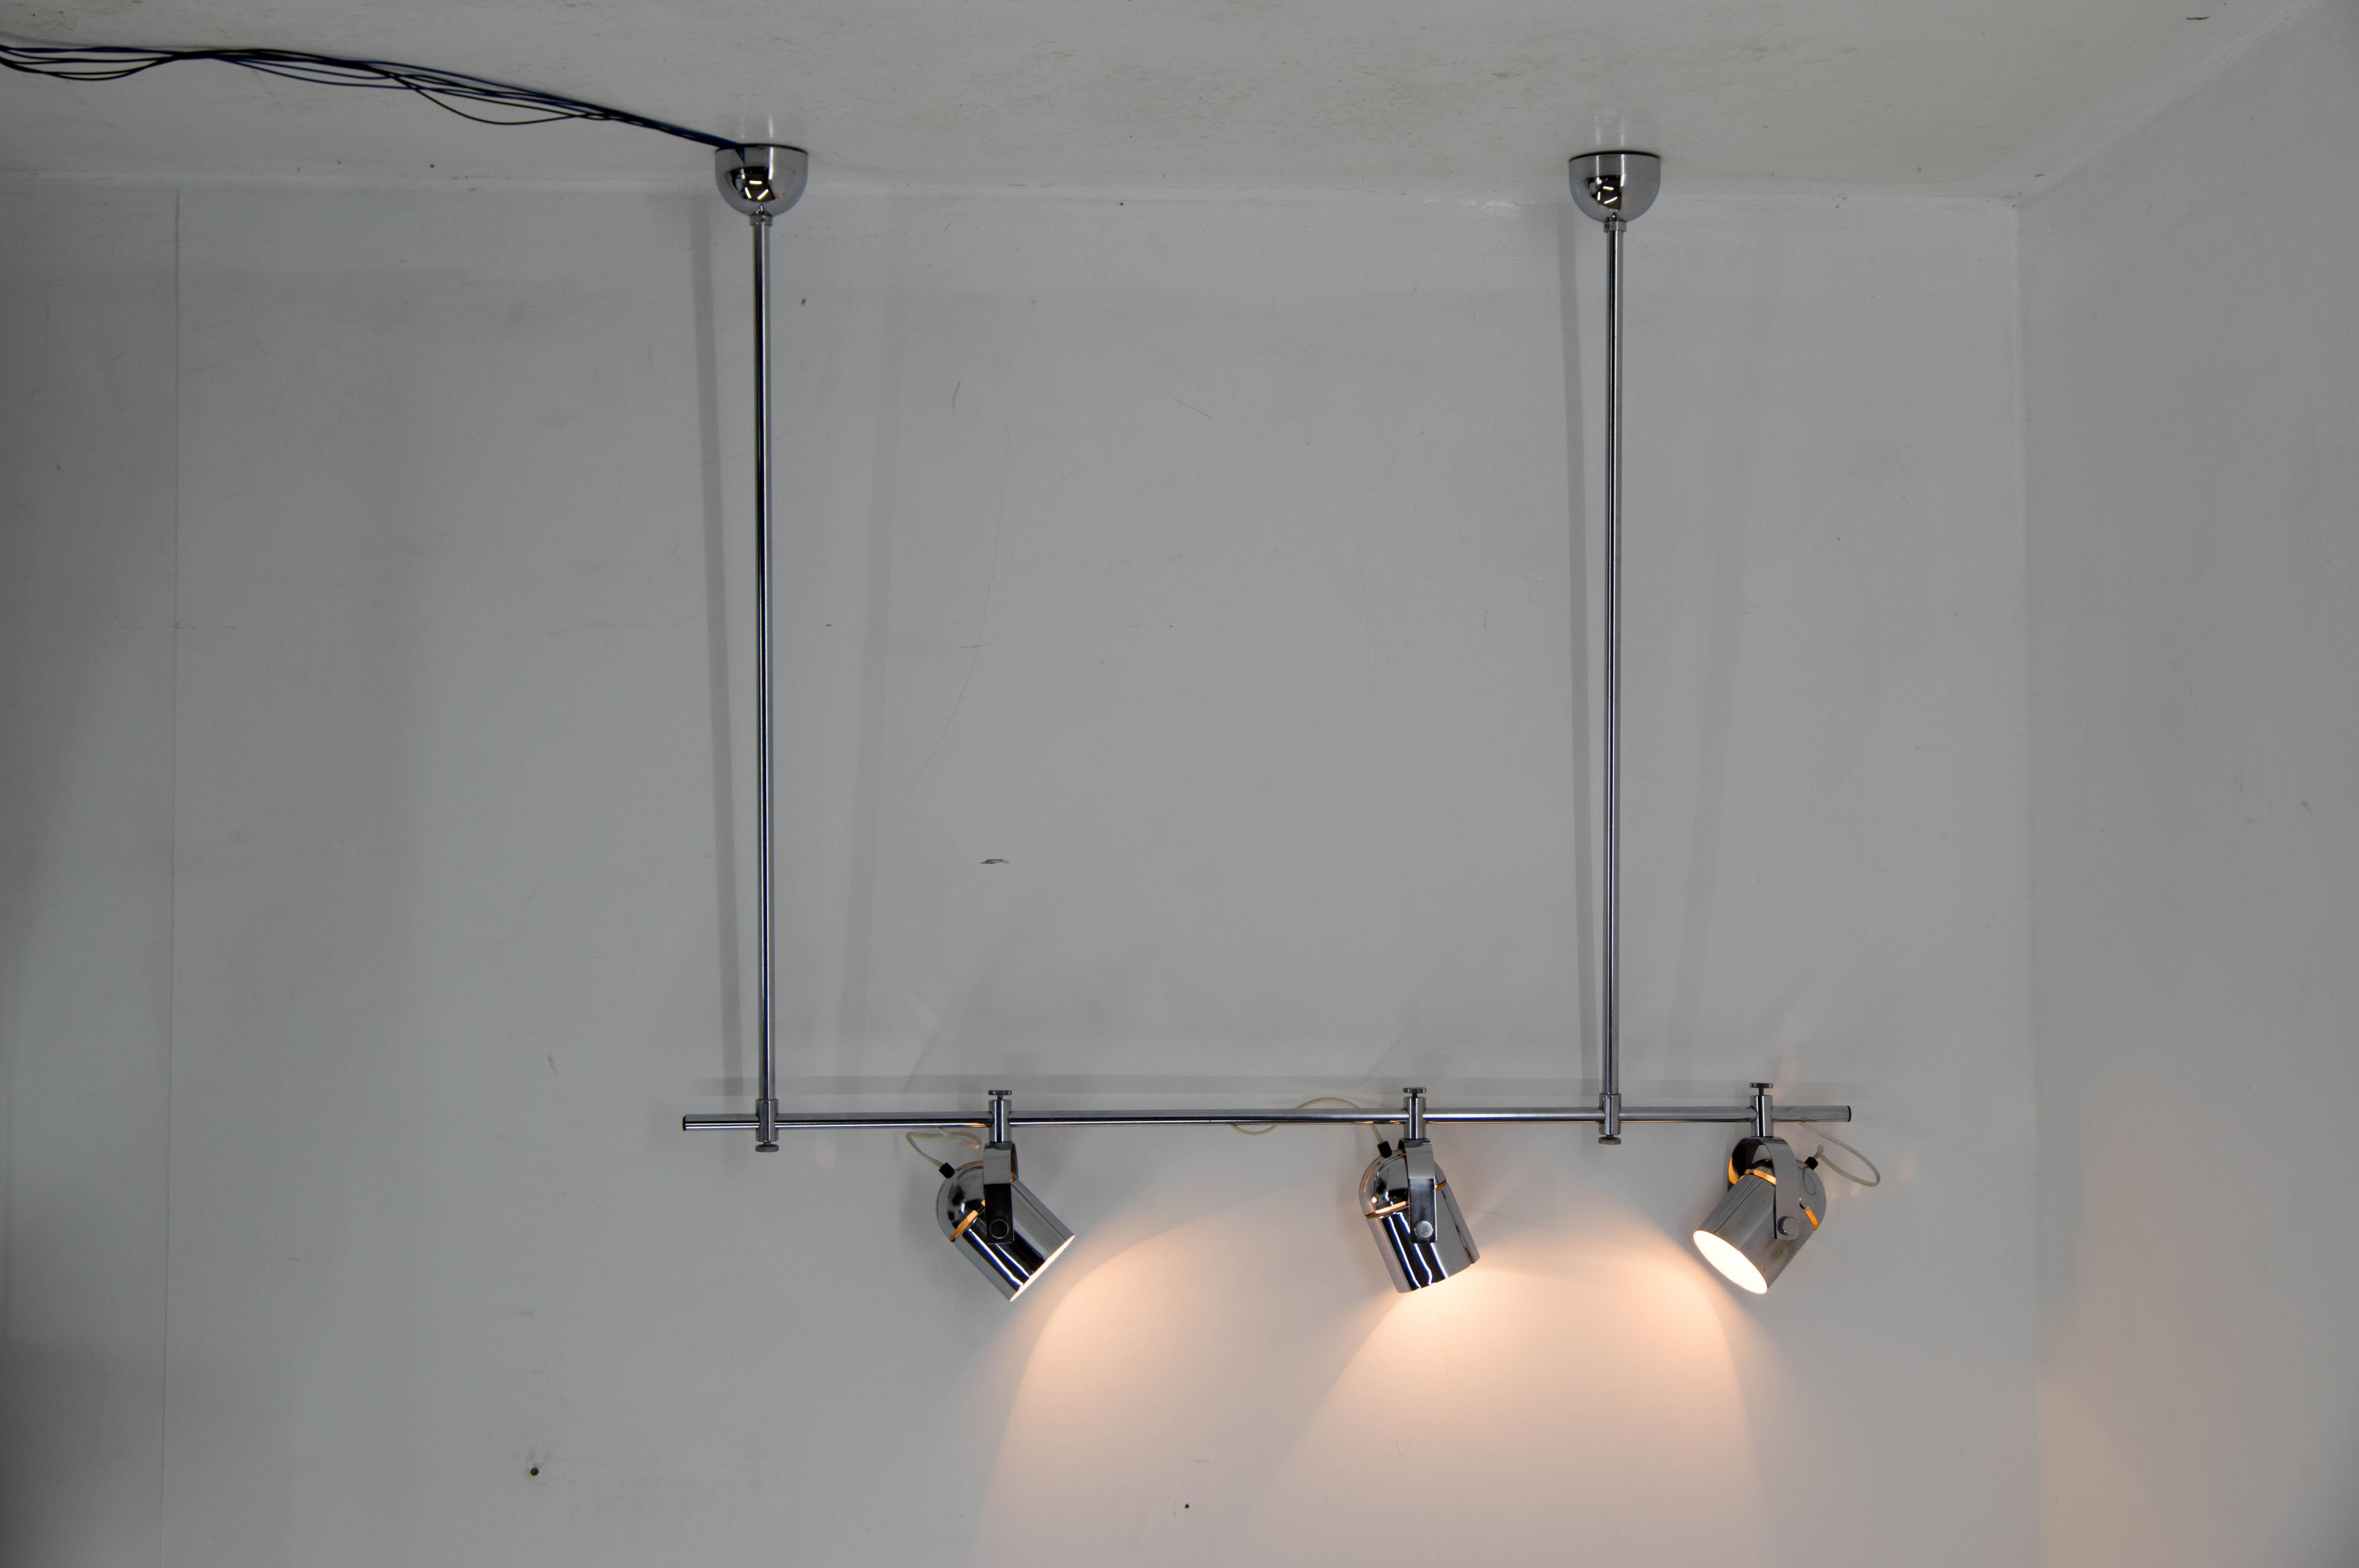 Variable ceiling light Combi Lux designed by Stanislav Indra.
Three adjustable shades allow different lighting options. 
Very good condition.
Cleaned, polished, rewired.
Six items available.
3 x 60W, E25-E27 bulbs.
US wiring compatible.